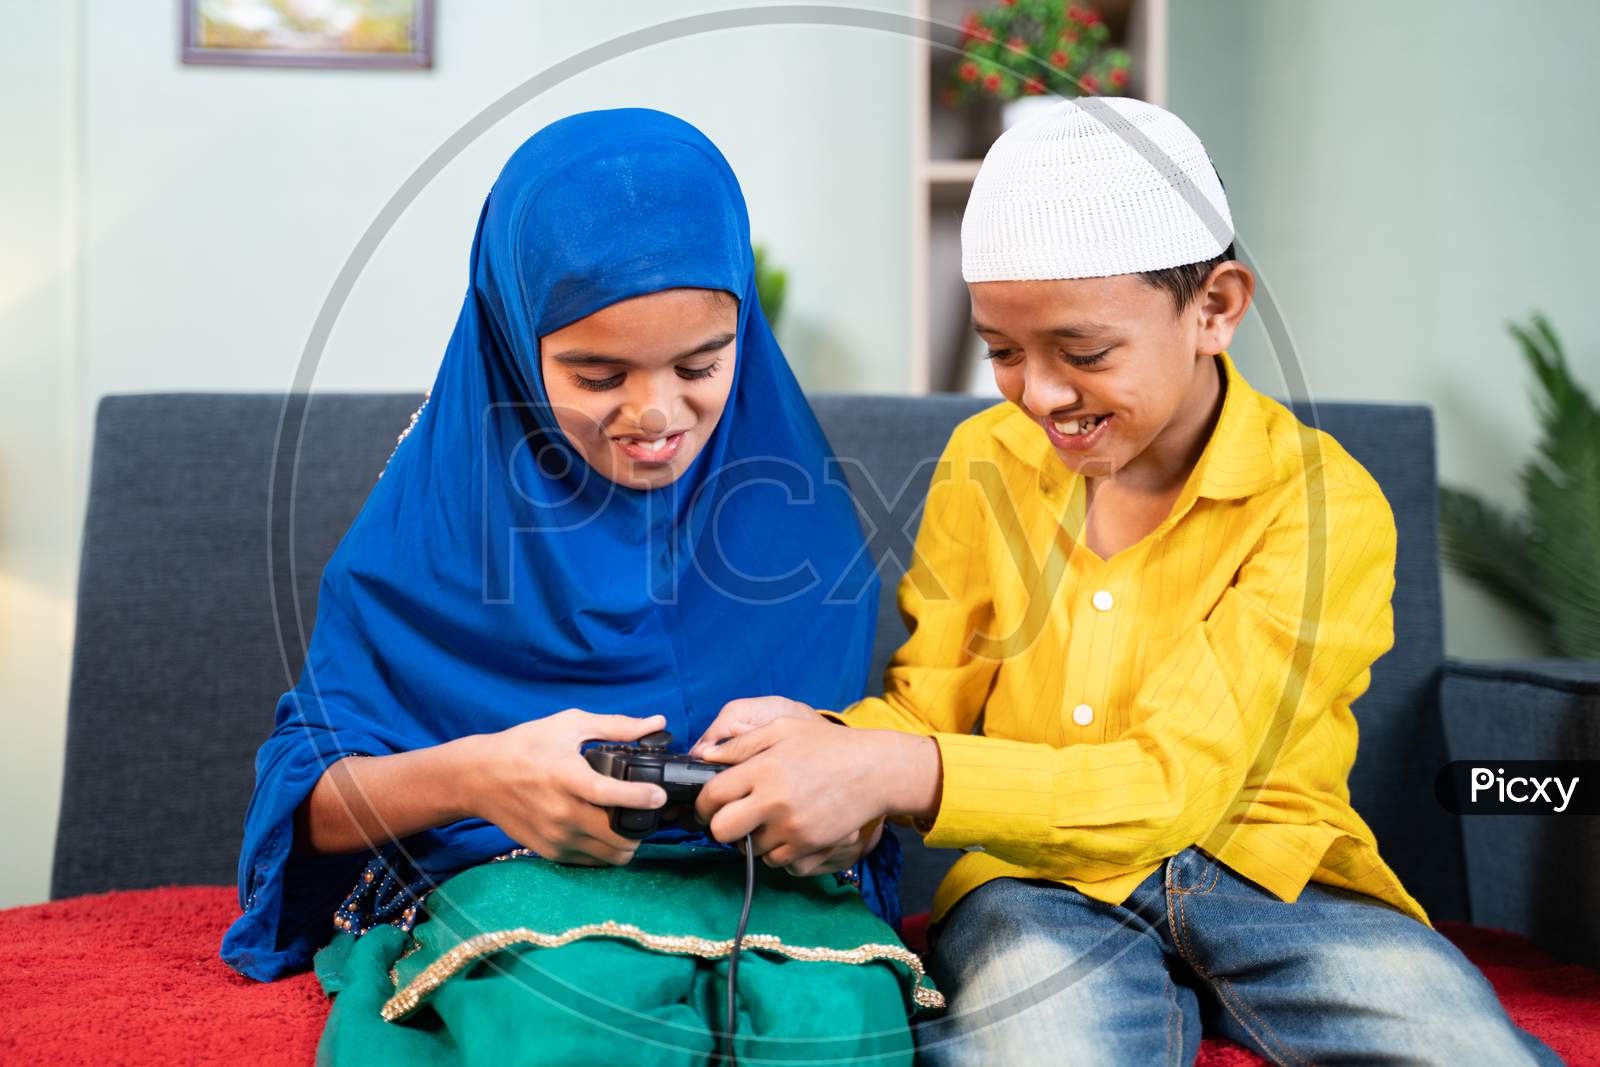 Muslim Brother Snatching Gamepad From His Sister To Play Video Game At Home - Concept Of Childhood Sibling Fighting